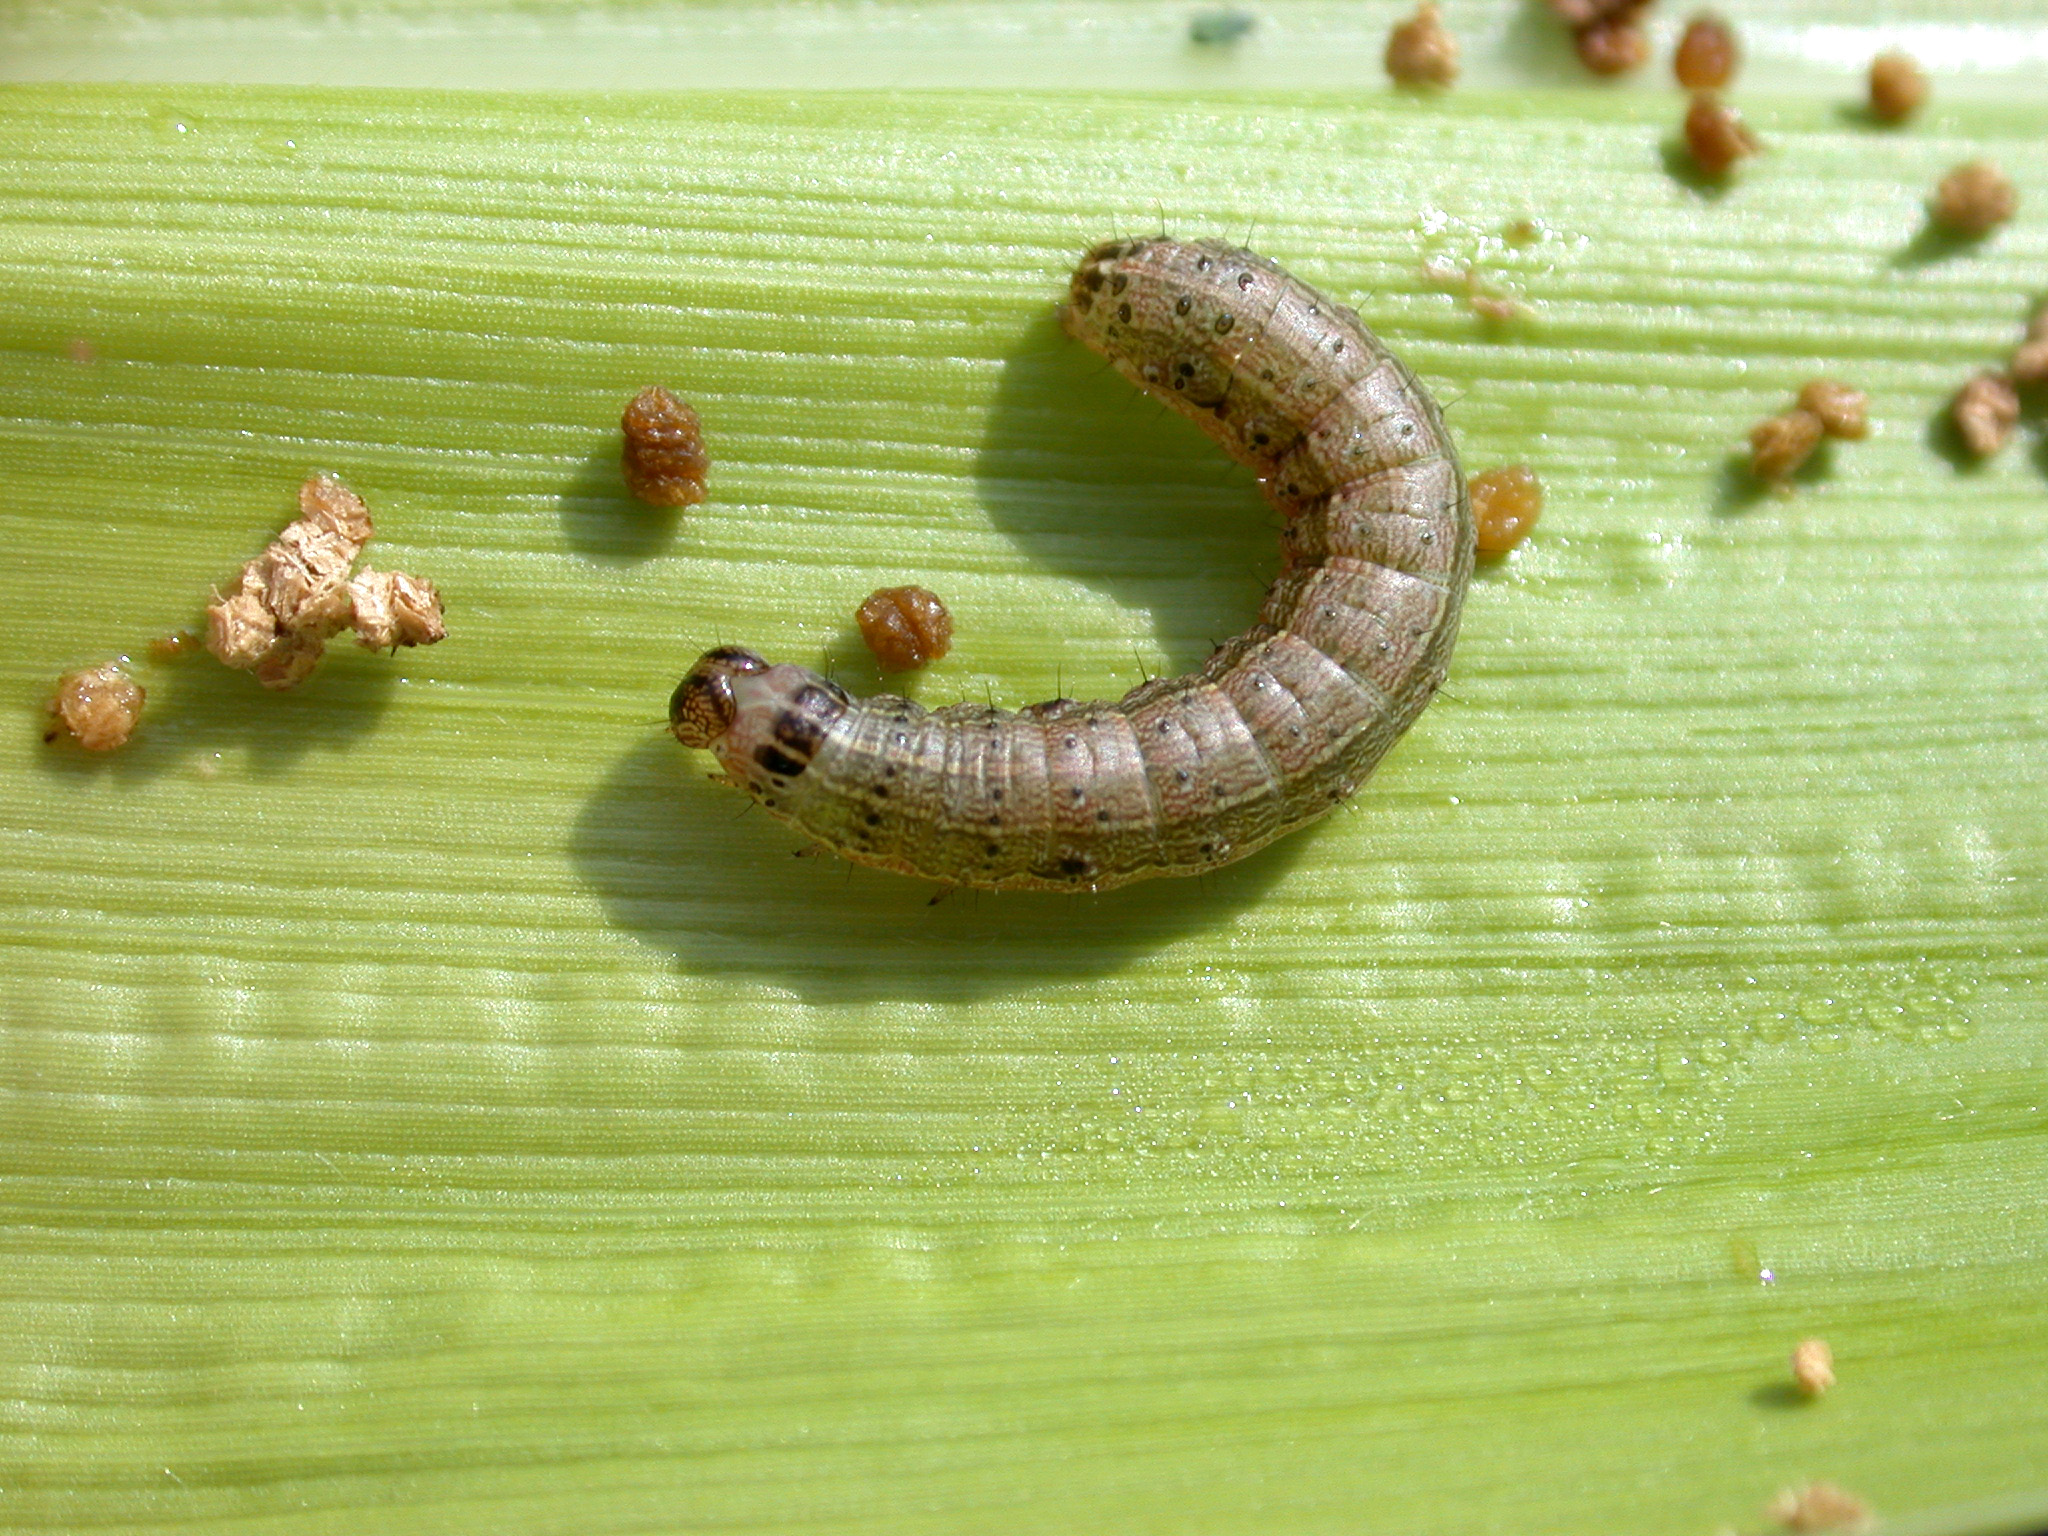 Late-instar fall armyworm larva on corn. Once they have reached this size, the caterpillars are very difficult to kill with insecticides. (Photo Credit: John Obermeyer)